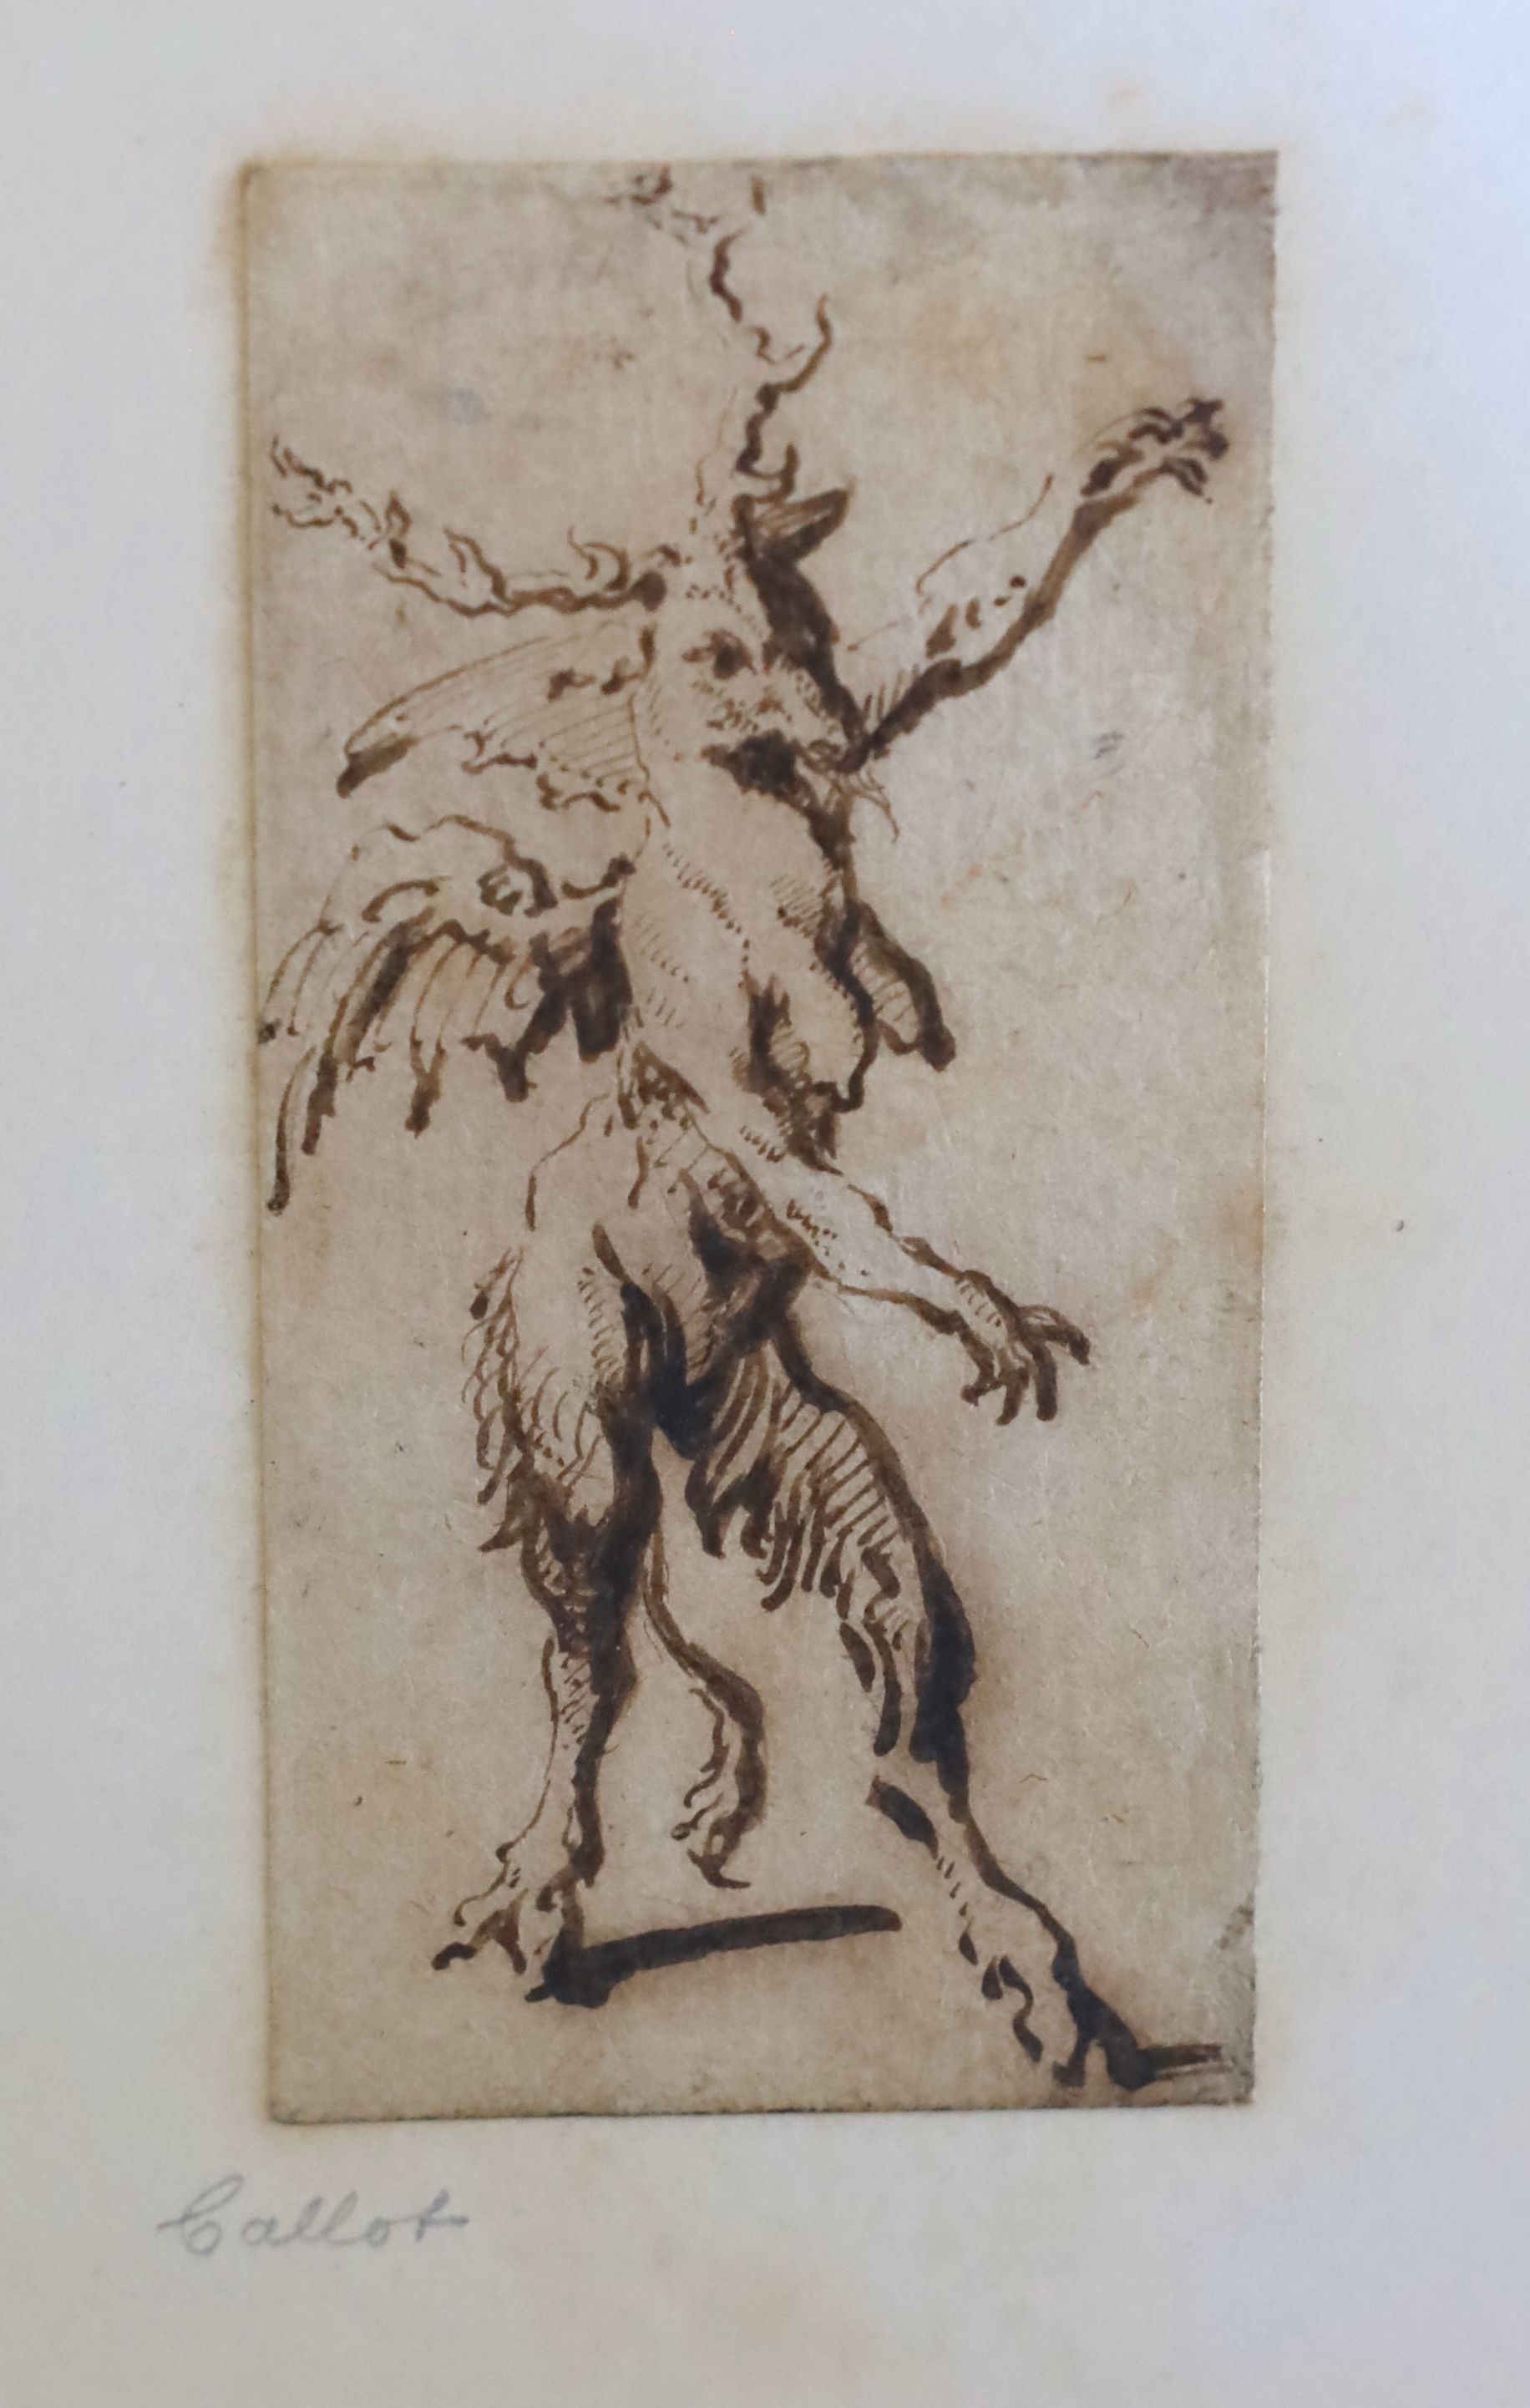 Attributed to Jacques Callot (1592-1635), A zoomorphic figure, pen and ink, 8.5 x 4cm.